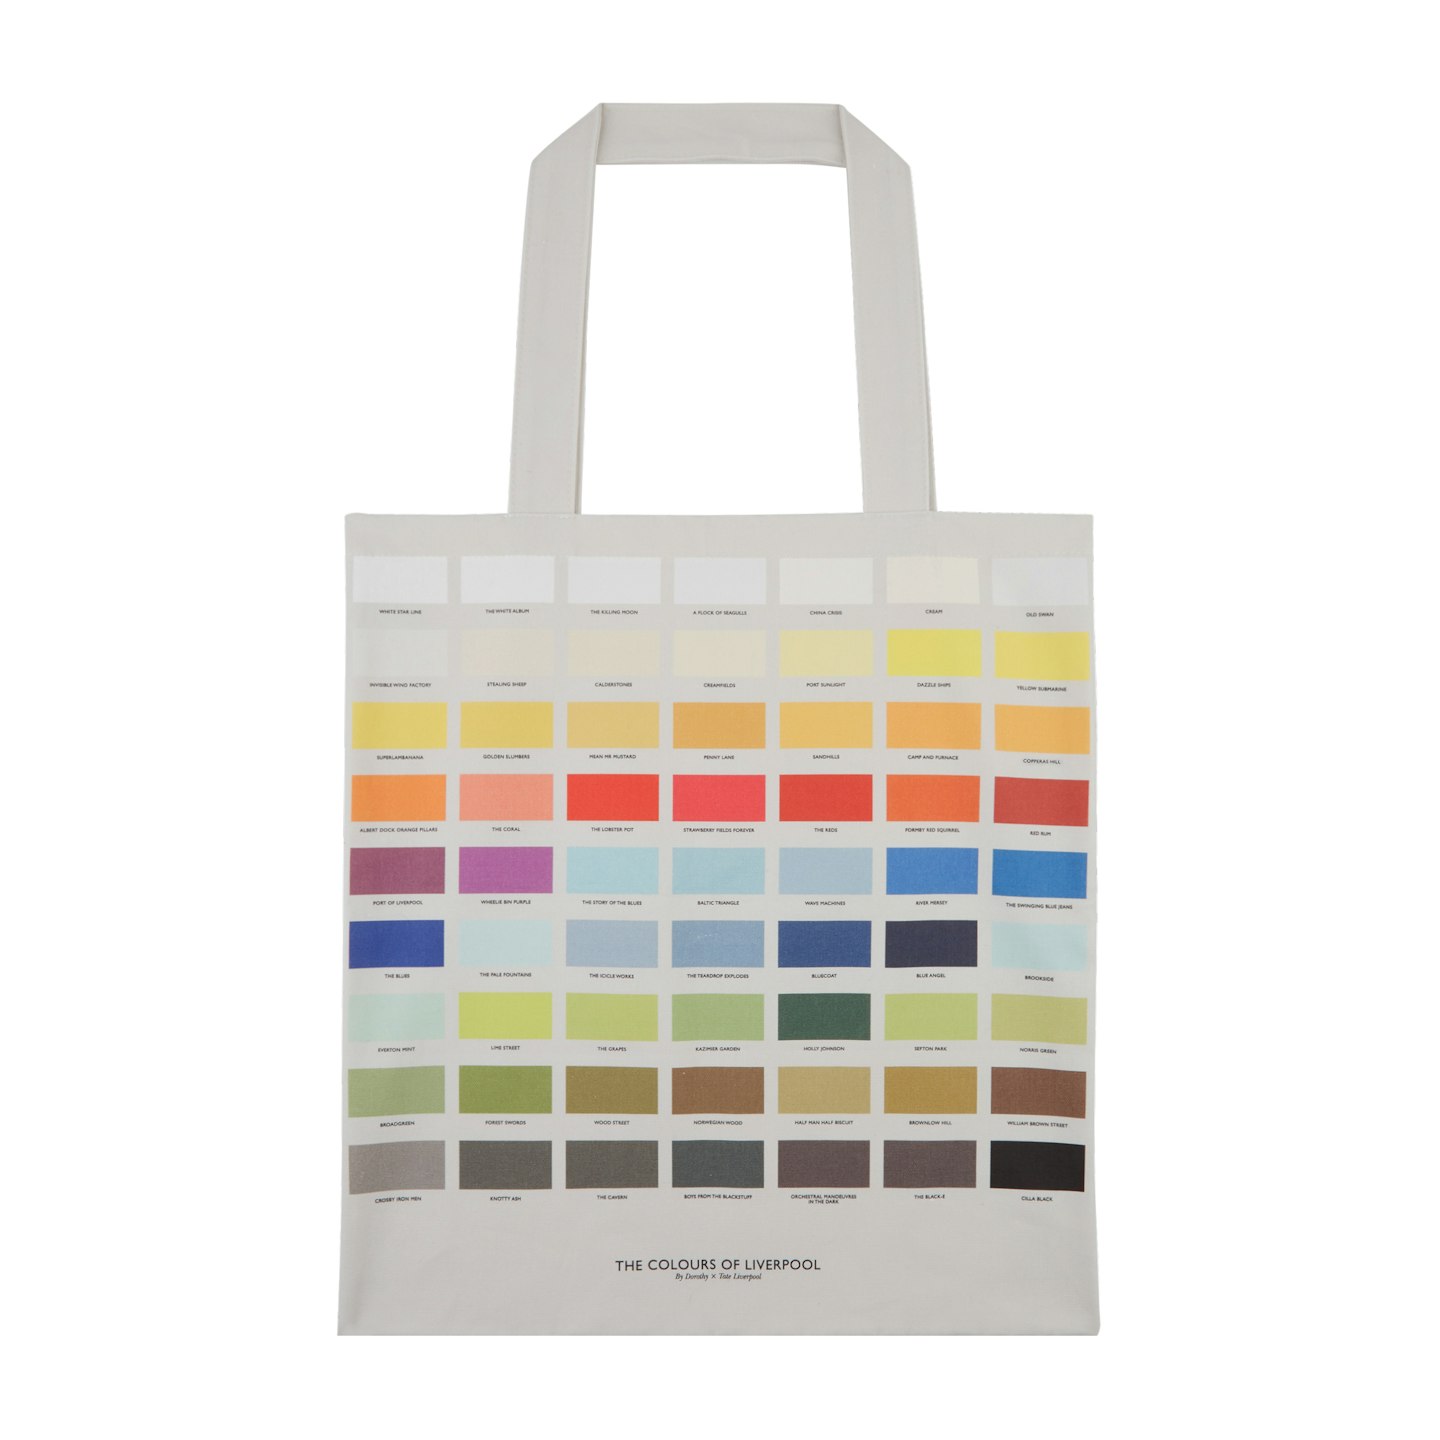 Dorothy x Tate, The Colours Of Liverpool Tote Bag, £15